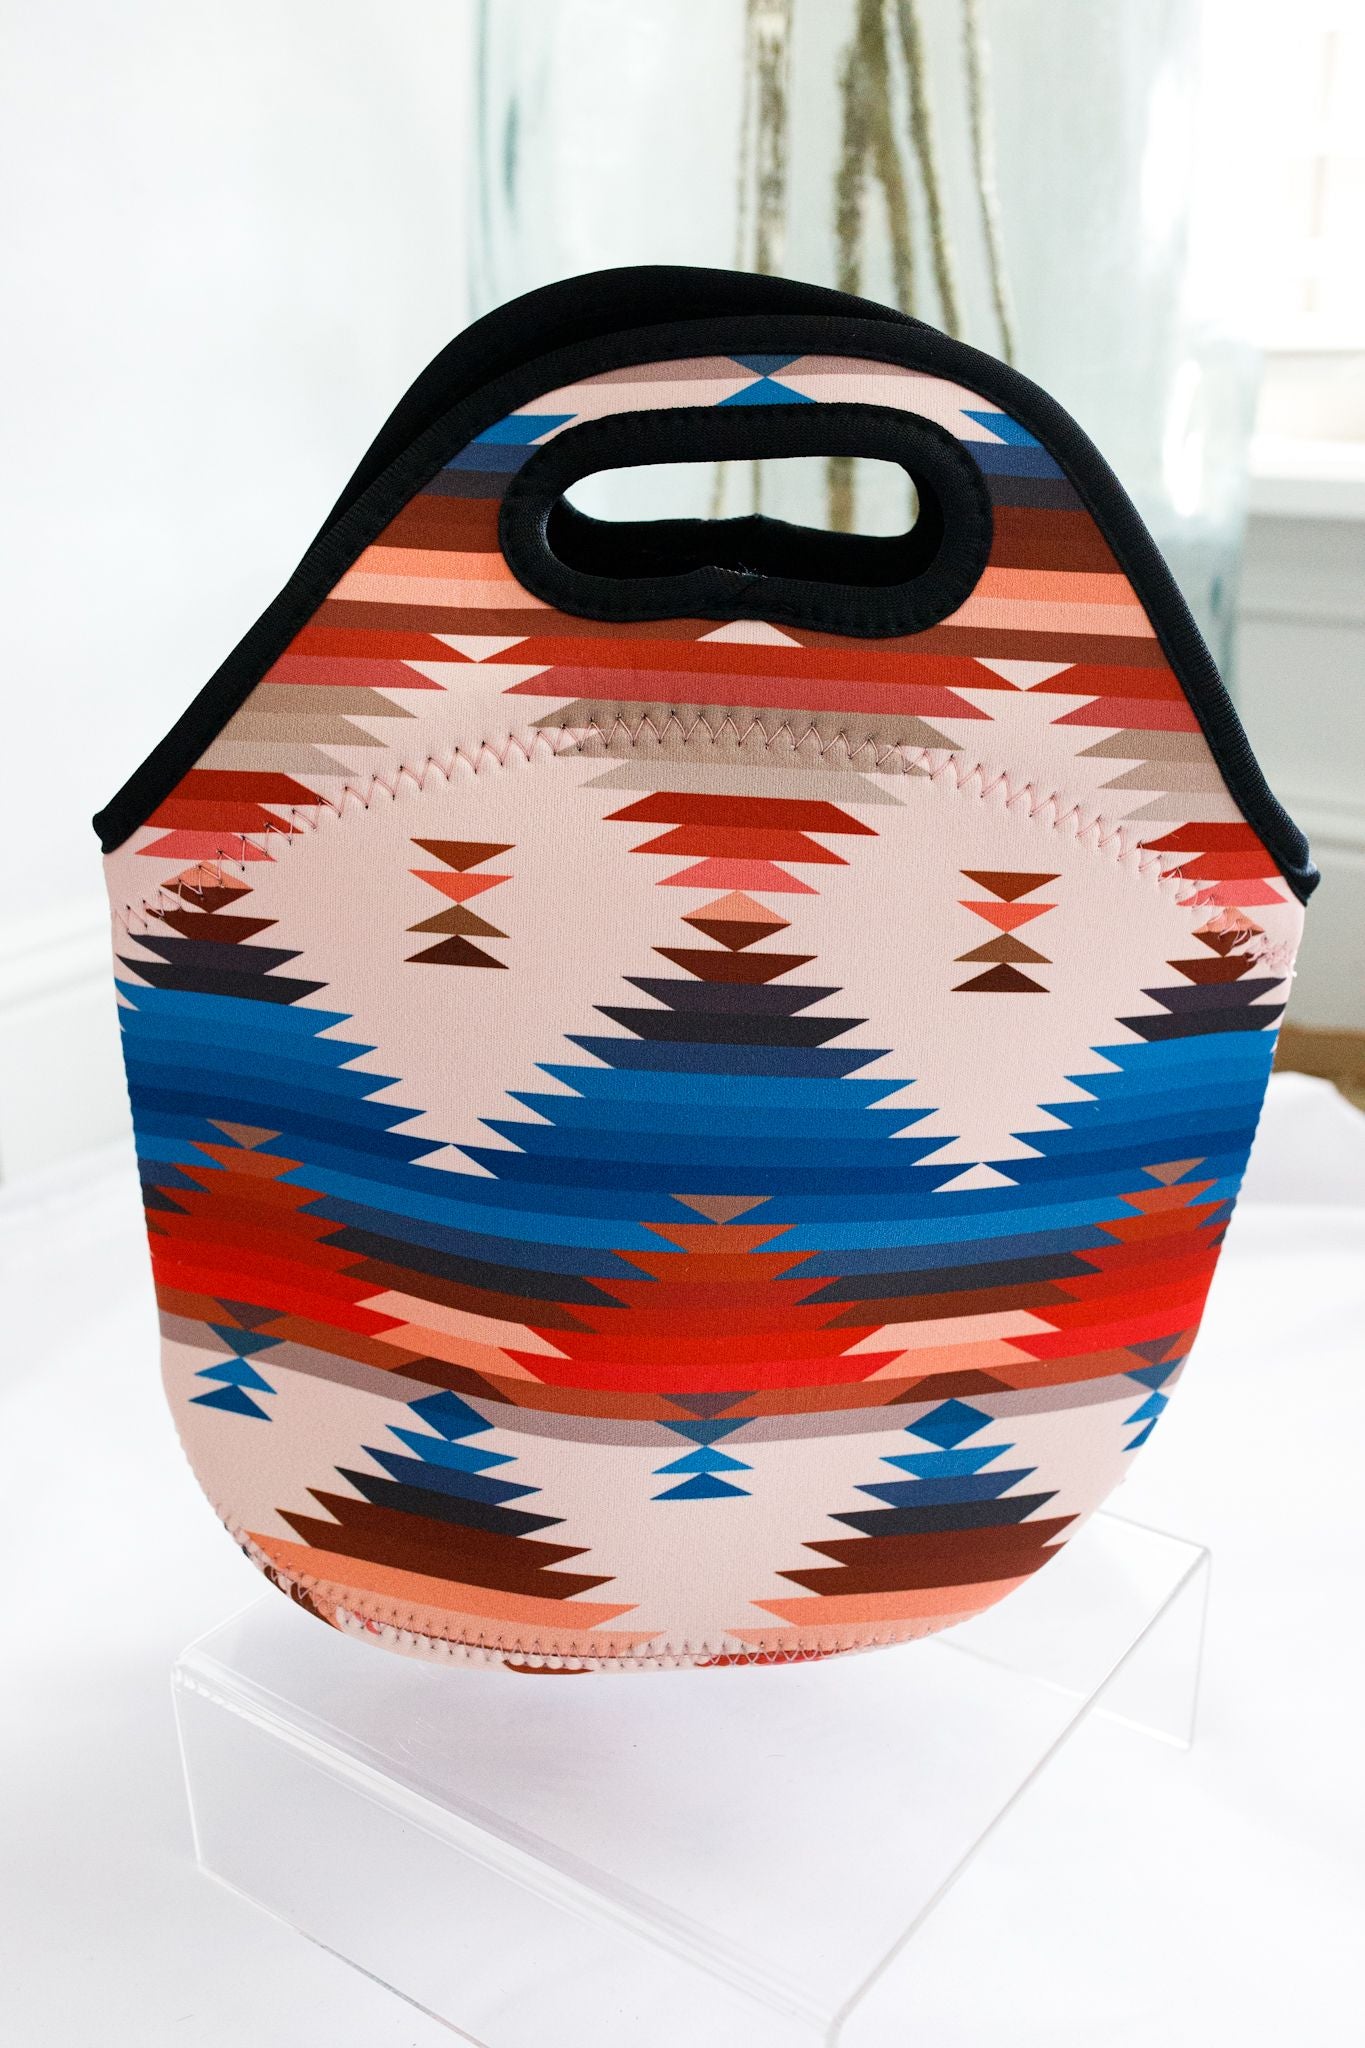 Howdy Lunch Tote - Front Porch Wholesale